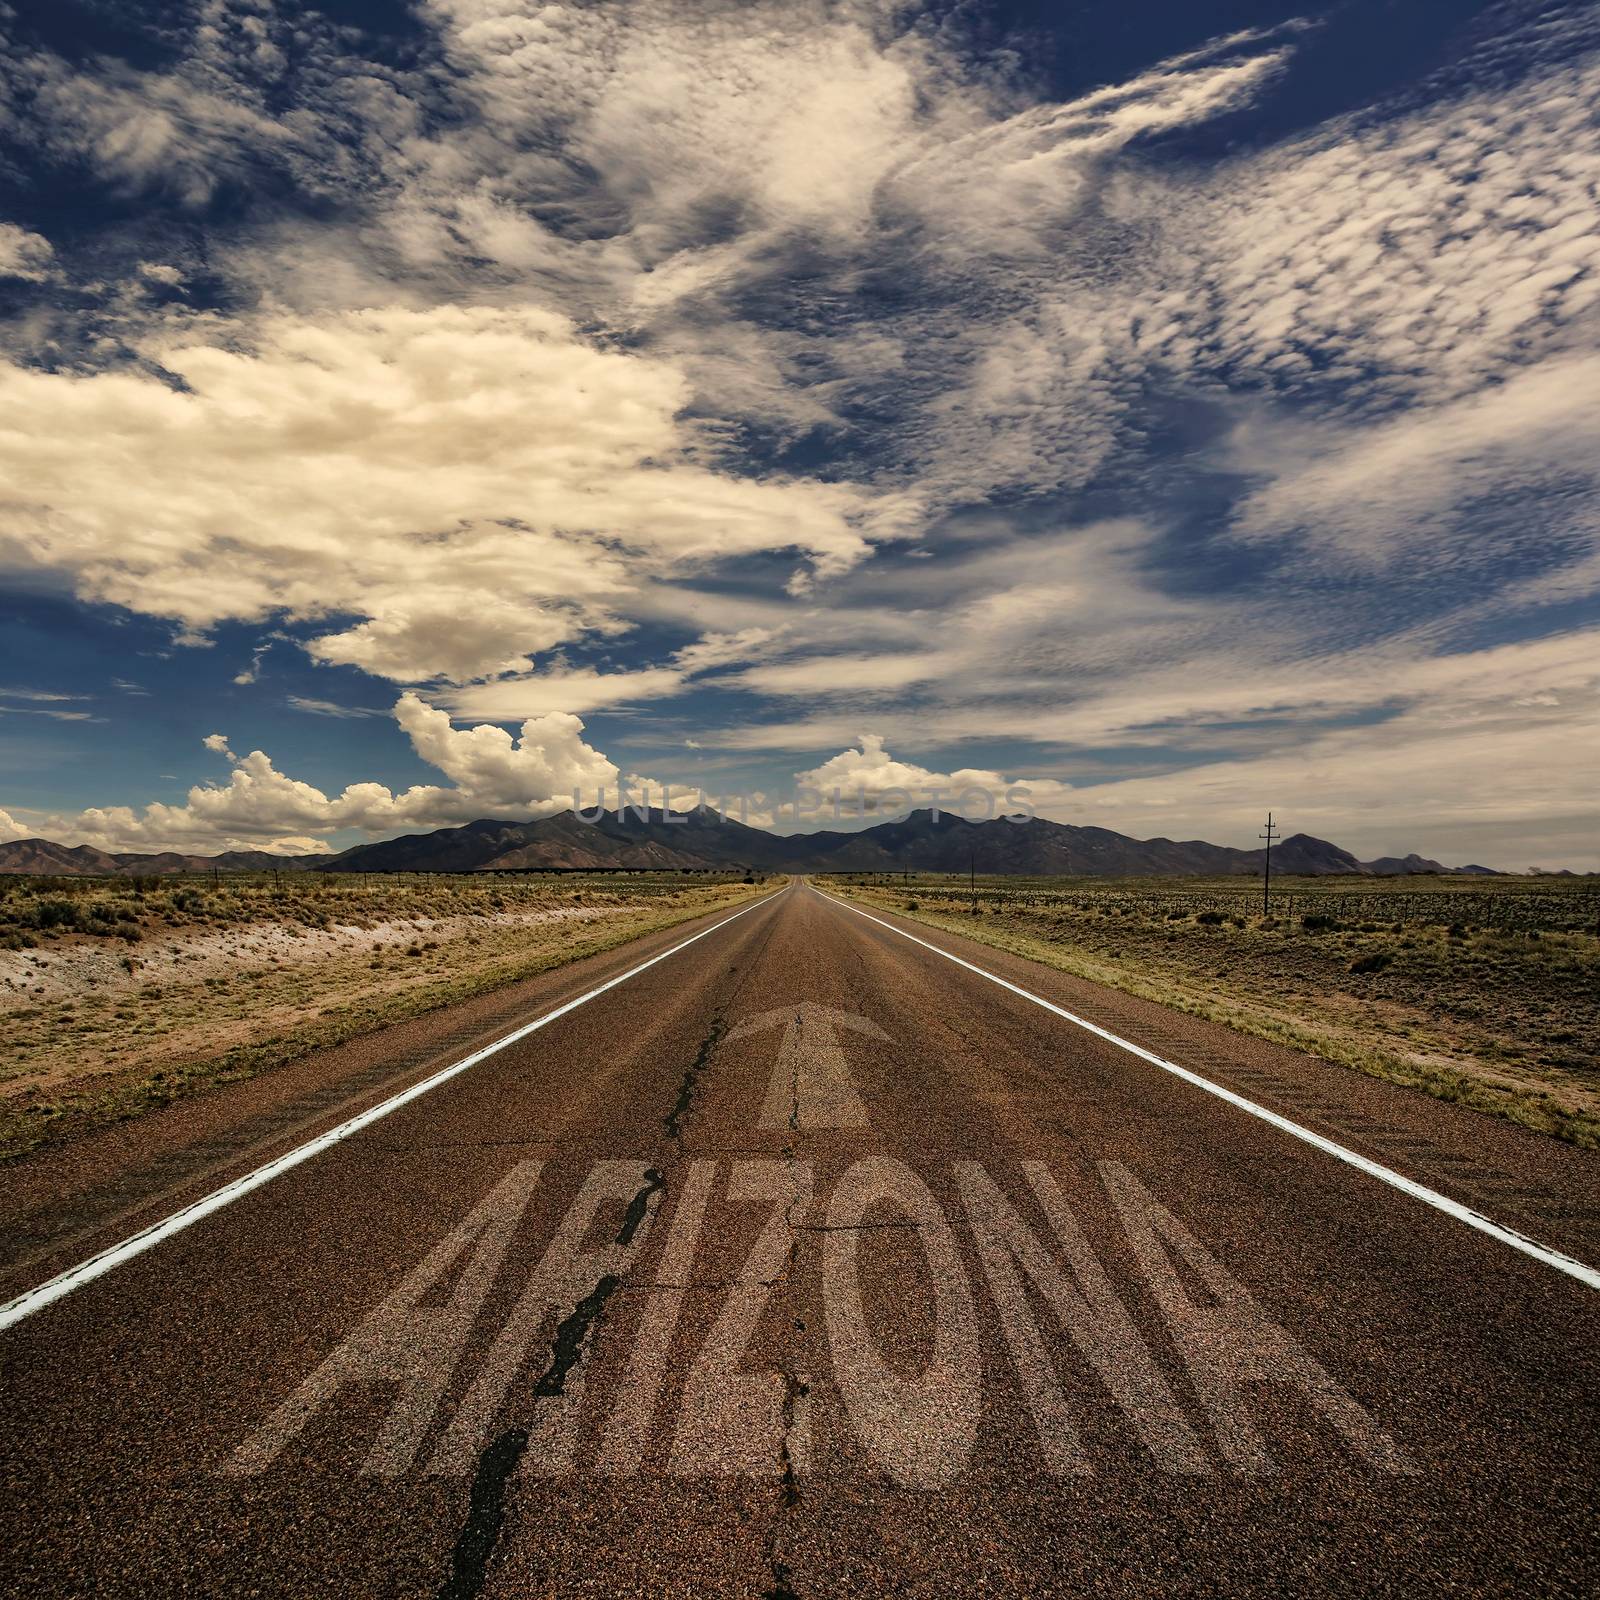 Conceptual image of desert road with the word Arizona and arrow